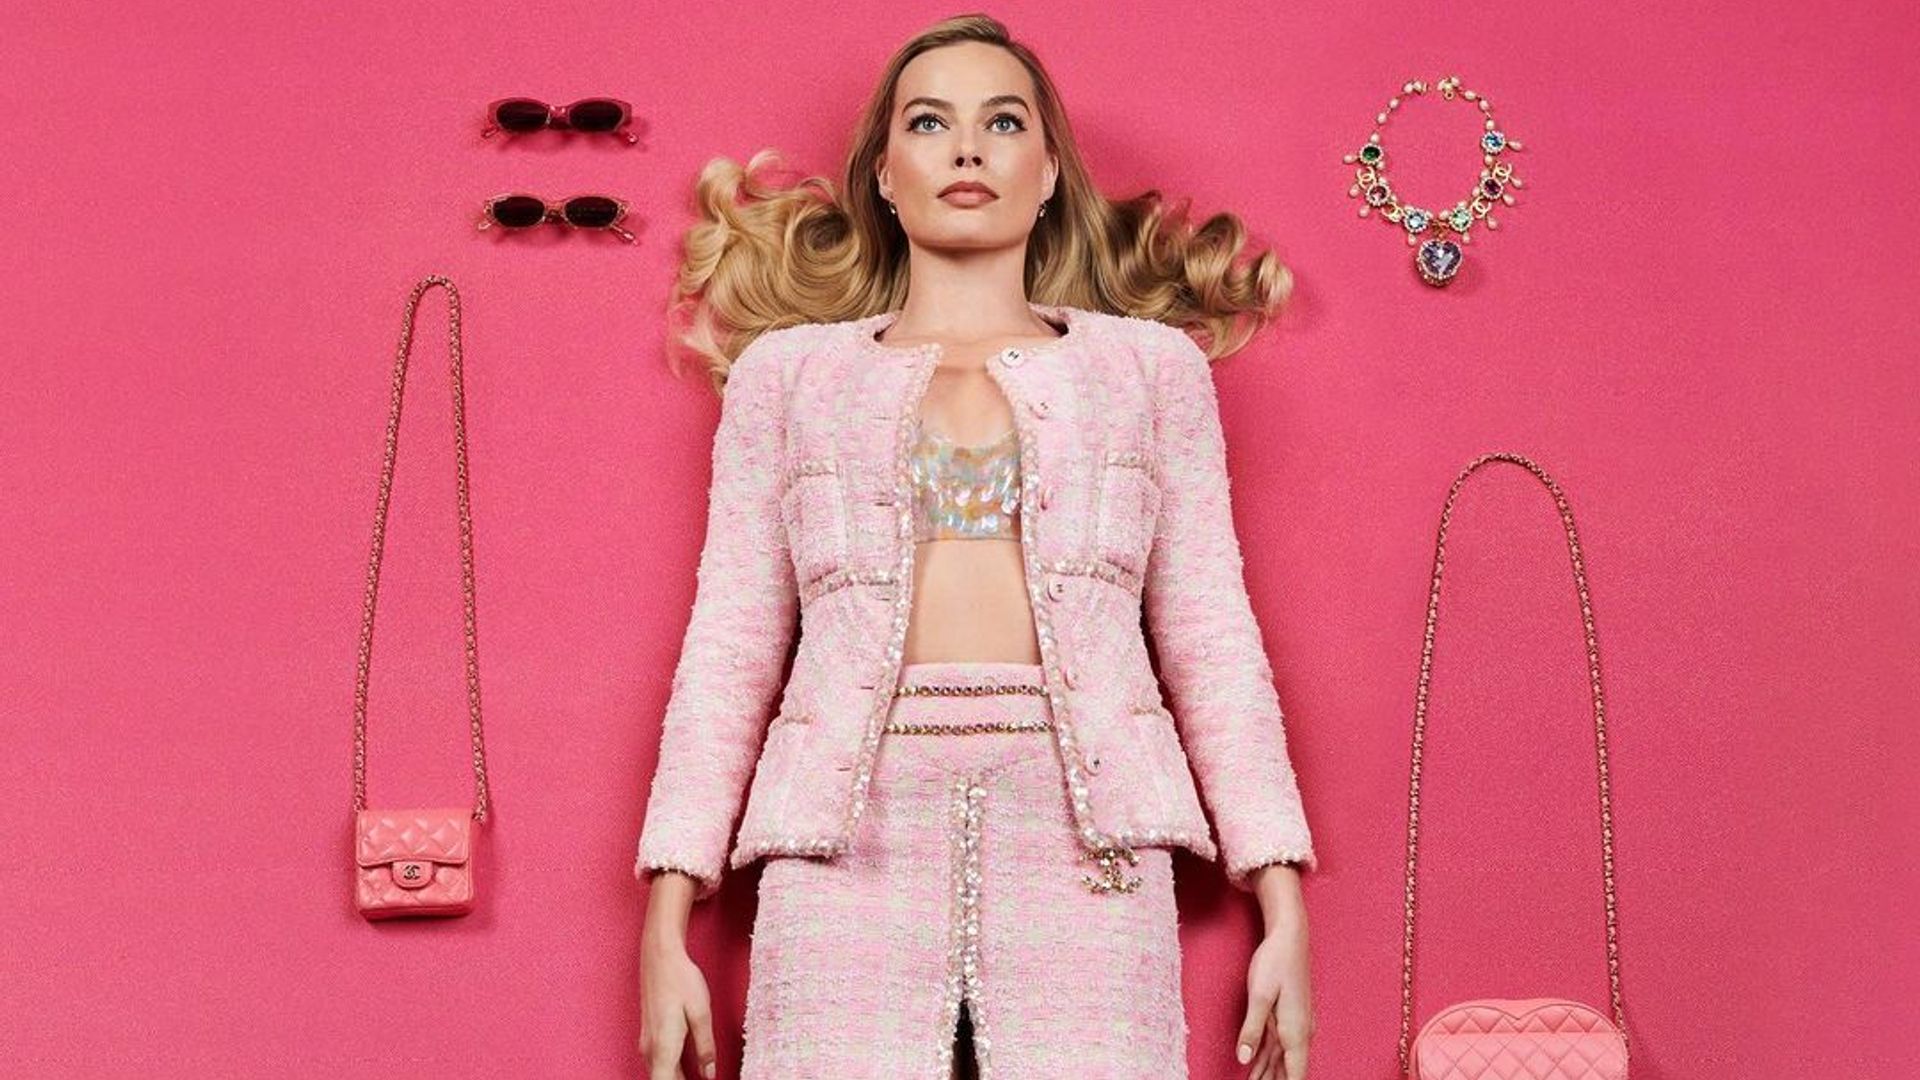 Loved Margot Robbie's Barbie press tour looks? Then you need this book says her stylist...